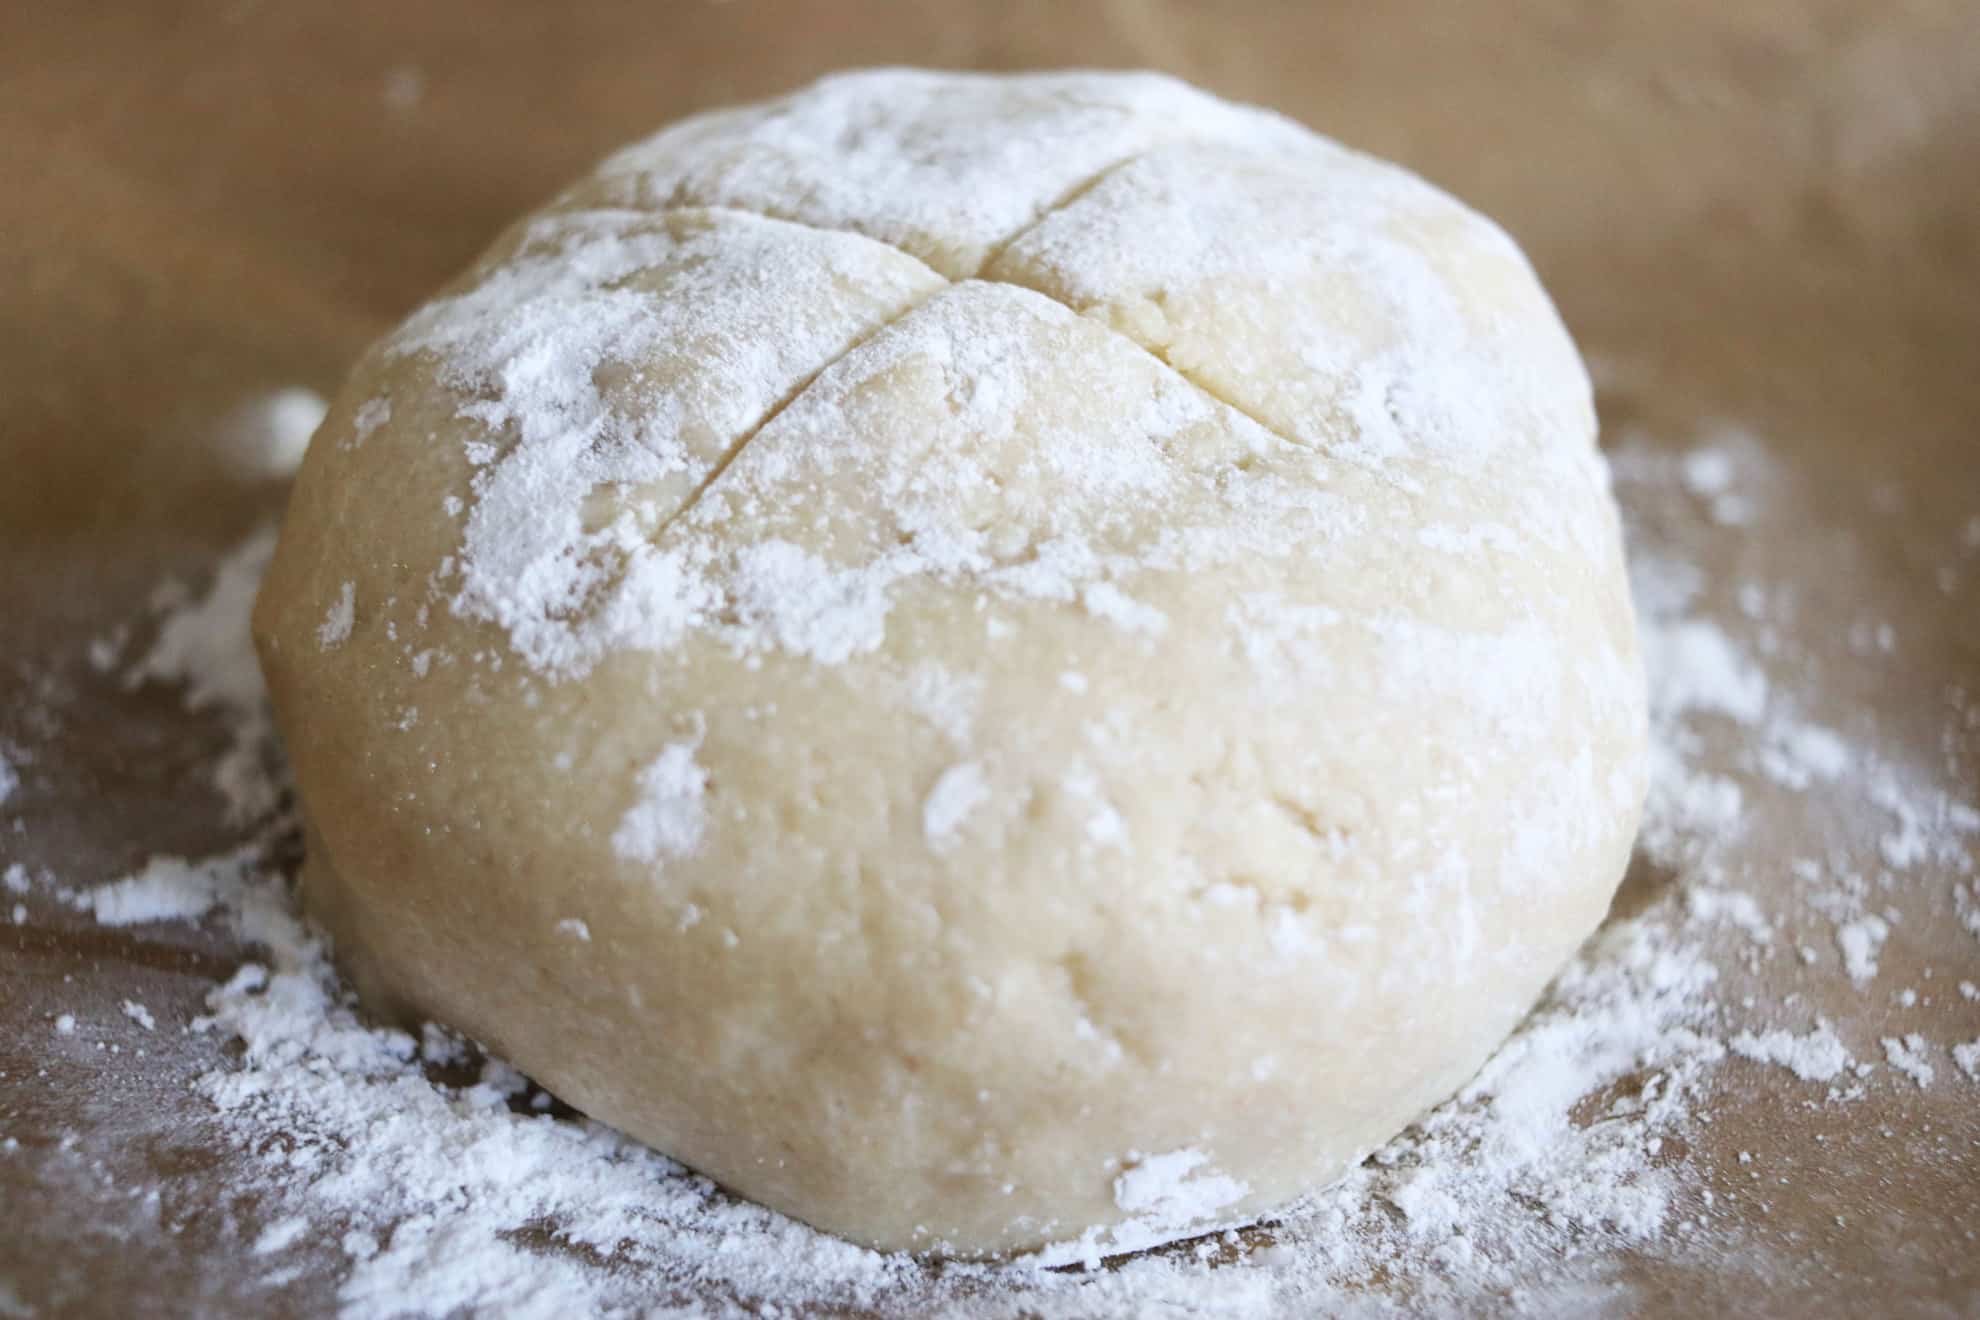 This is a side view of a ball of soda bread dough on a piece of brown parchment paper. The bread has a X in the center and is dusted with flour.